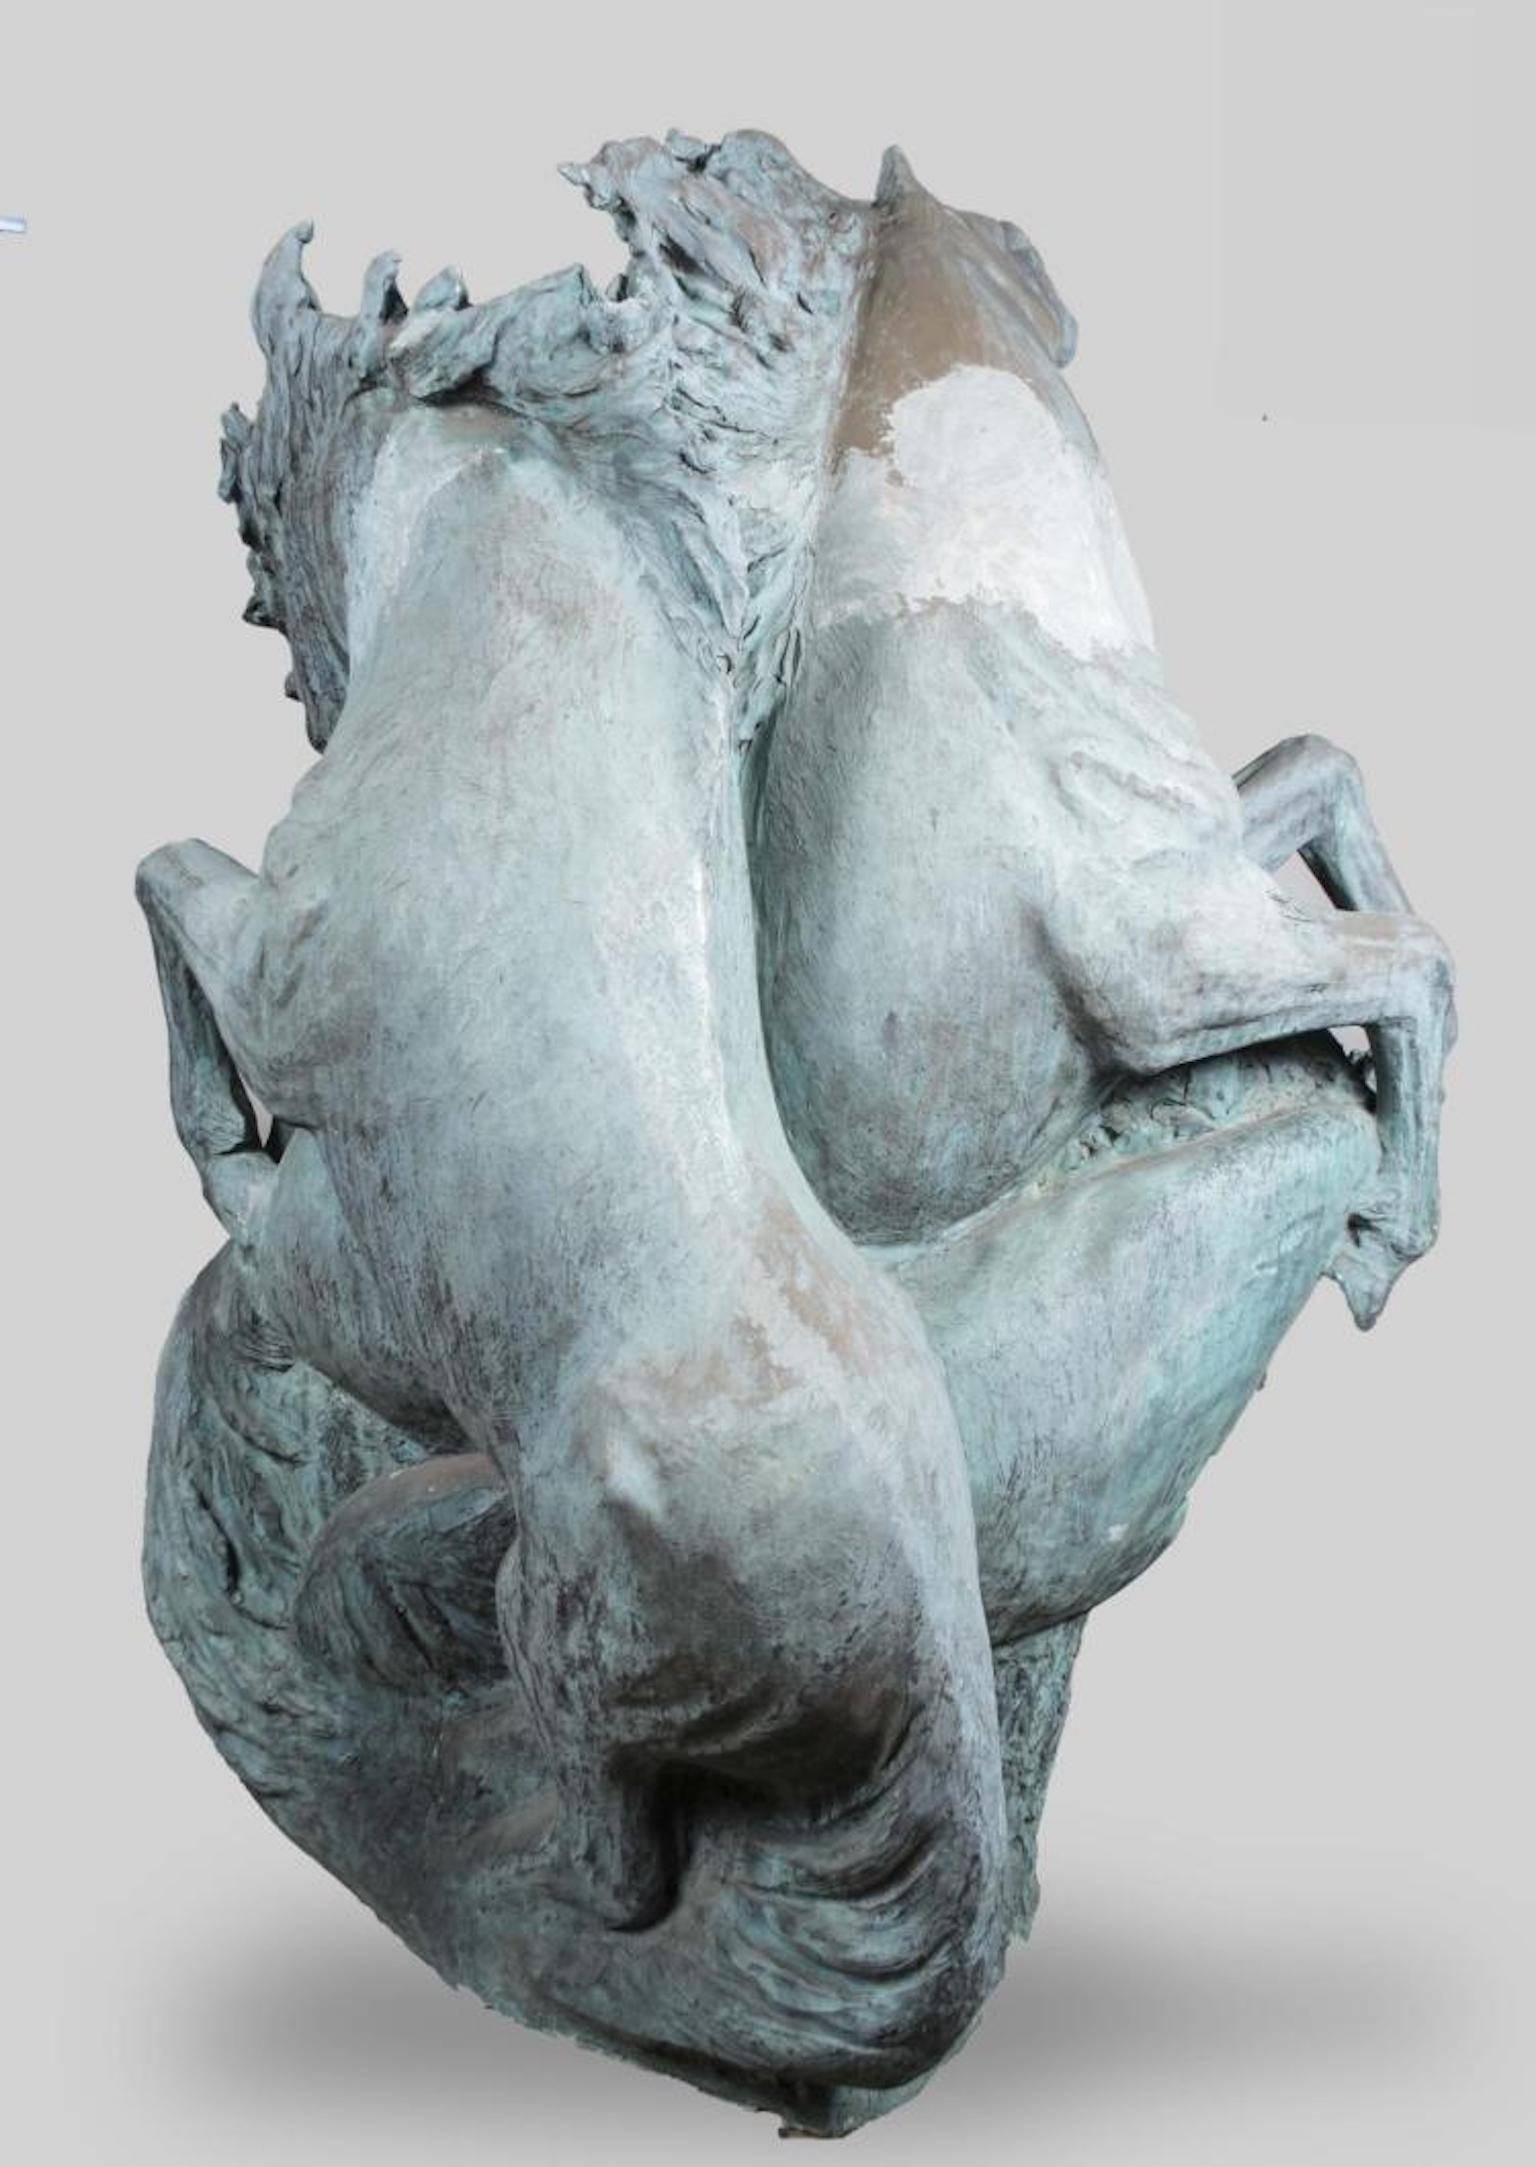 Large Italian sculptural fountain of horses modeled in the sea. Plaster with a green and blue weathered patina, 20th century Approximately 8 ft tall.